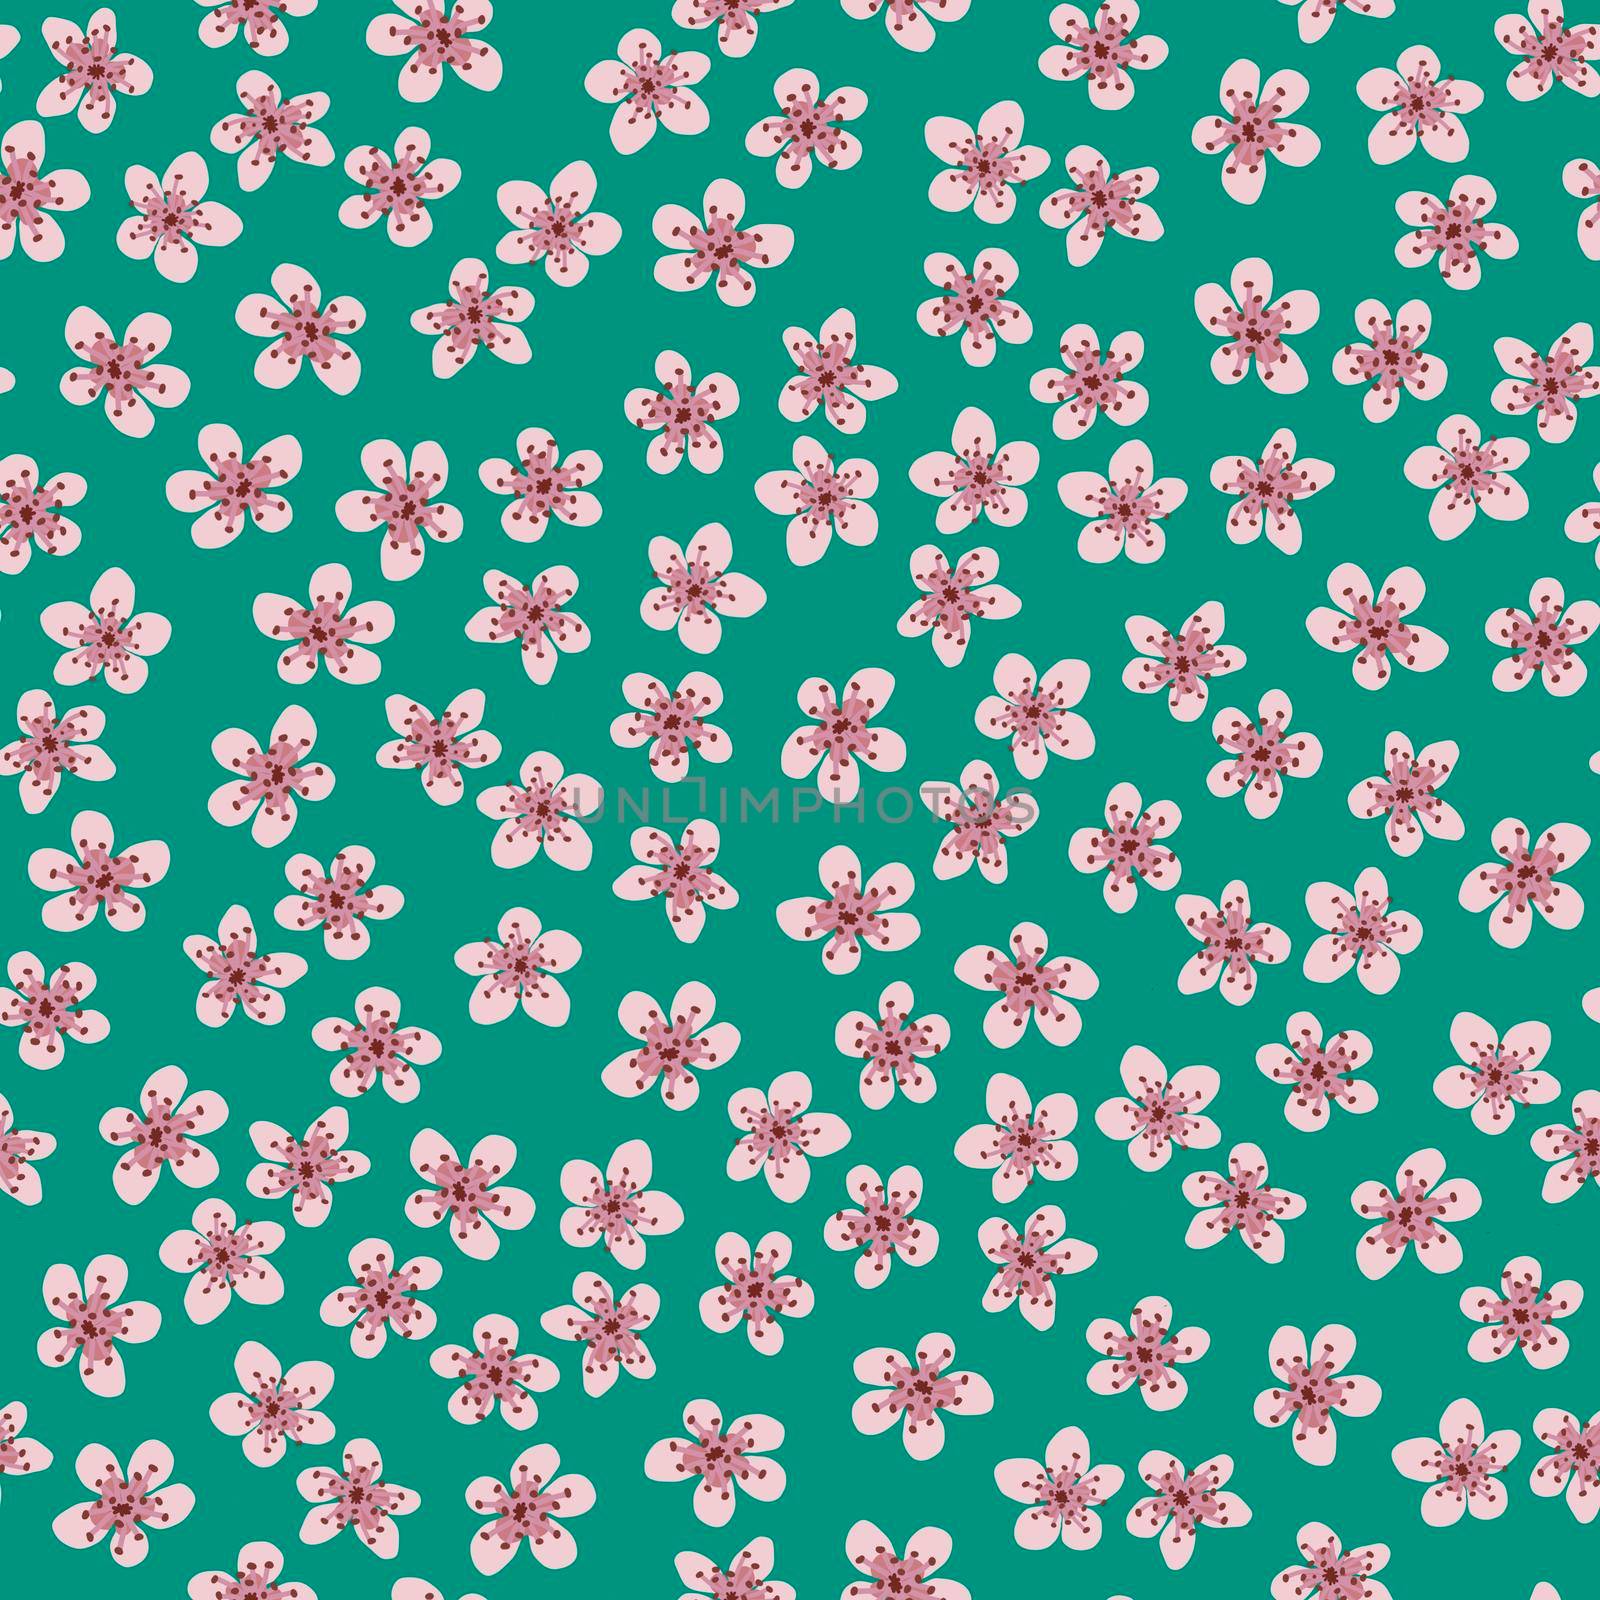 Seamless pattern with blossoming Japanese cherry sakura for fabric, packaging, wallpaper, textile decor, design, invitations, print, gift wrap, manufacturing. Pink flowers on sea green background. by Angelsmoon